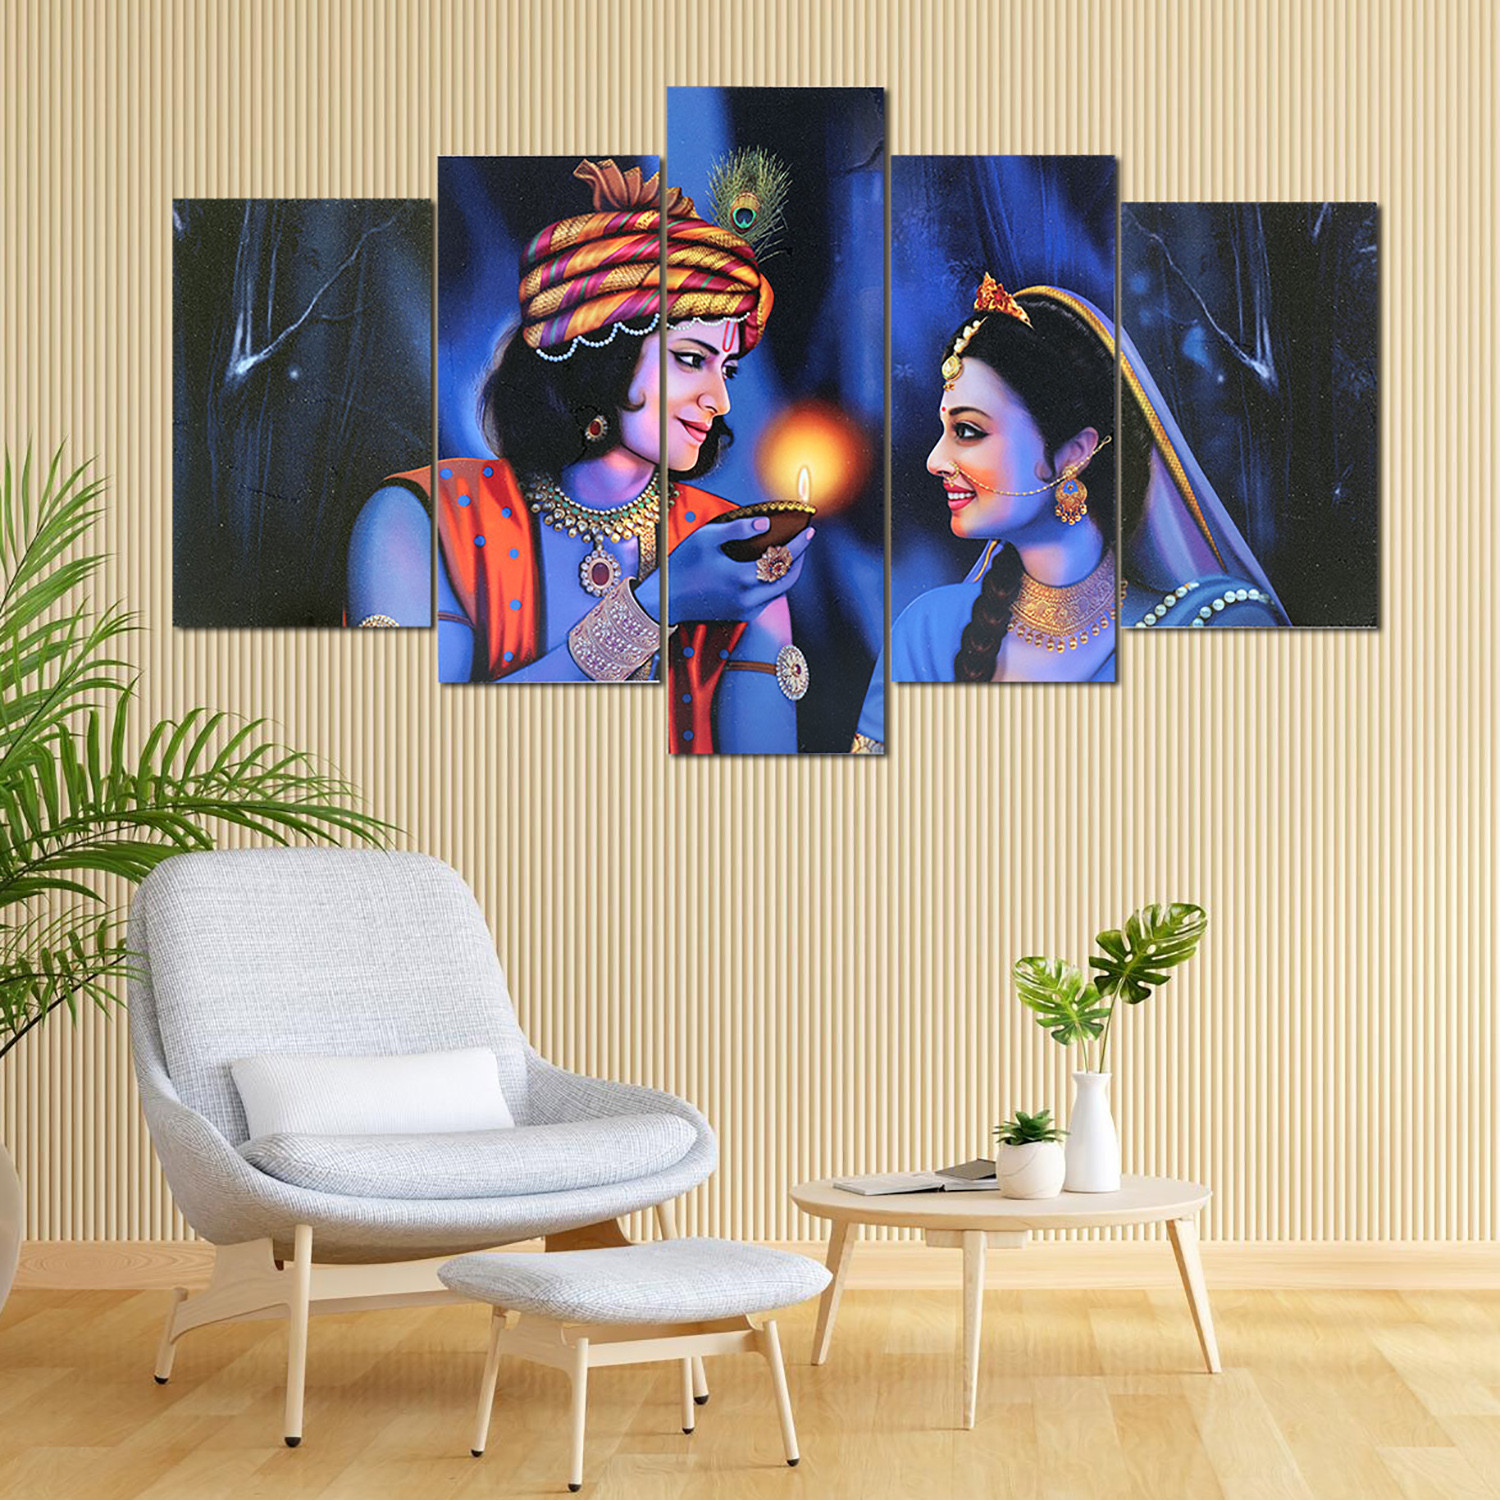 Kuber Industries Wall Paintings | MDF Wooden Wall Art for Living Room |Wall Sculpture | Radha-Krishna Painting for Bedroom | Office | Hotels | Gift | 2450KIK1 |5 Piece Set| Blue